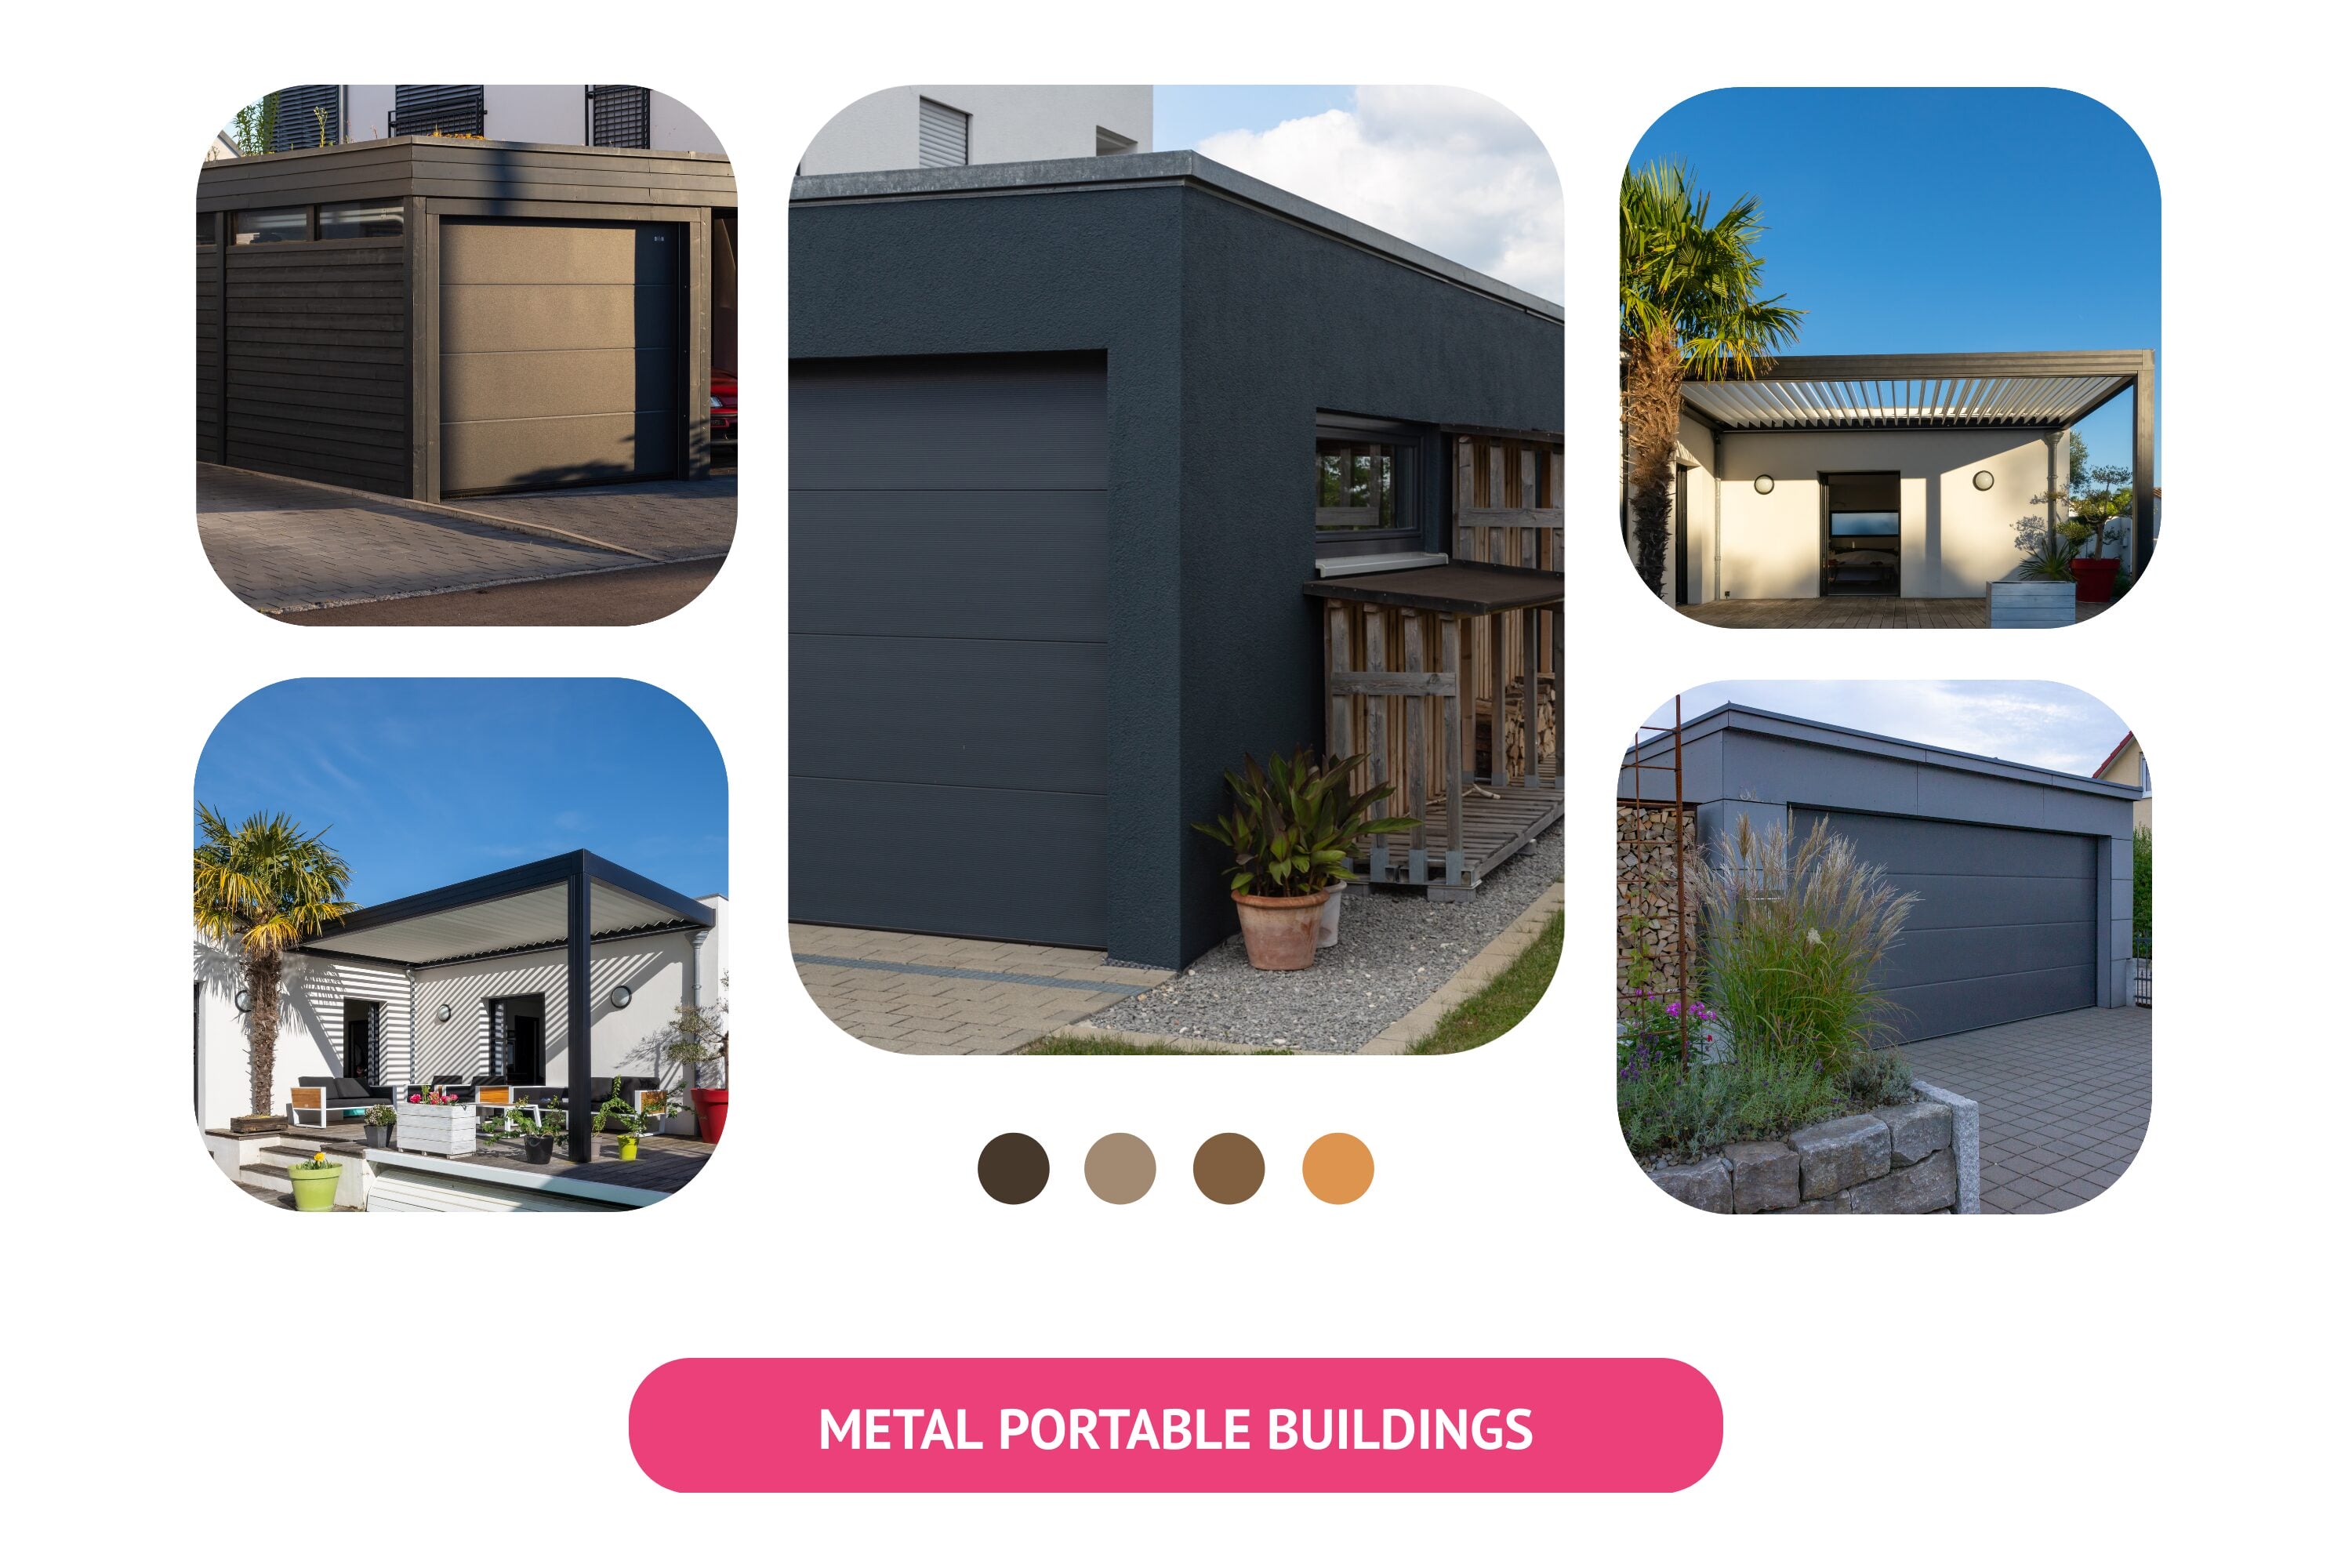 Metal portable buildings are an excellent solution for versatile, durable, and convenient space needs.